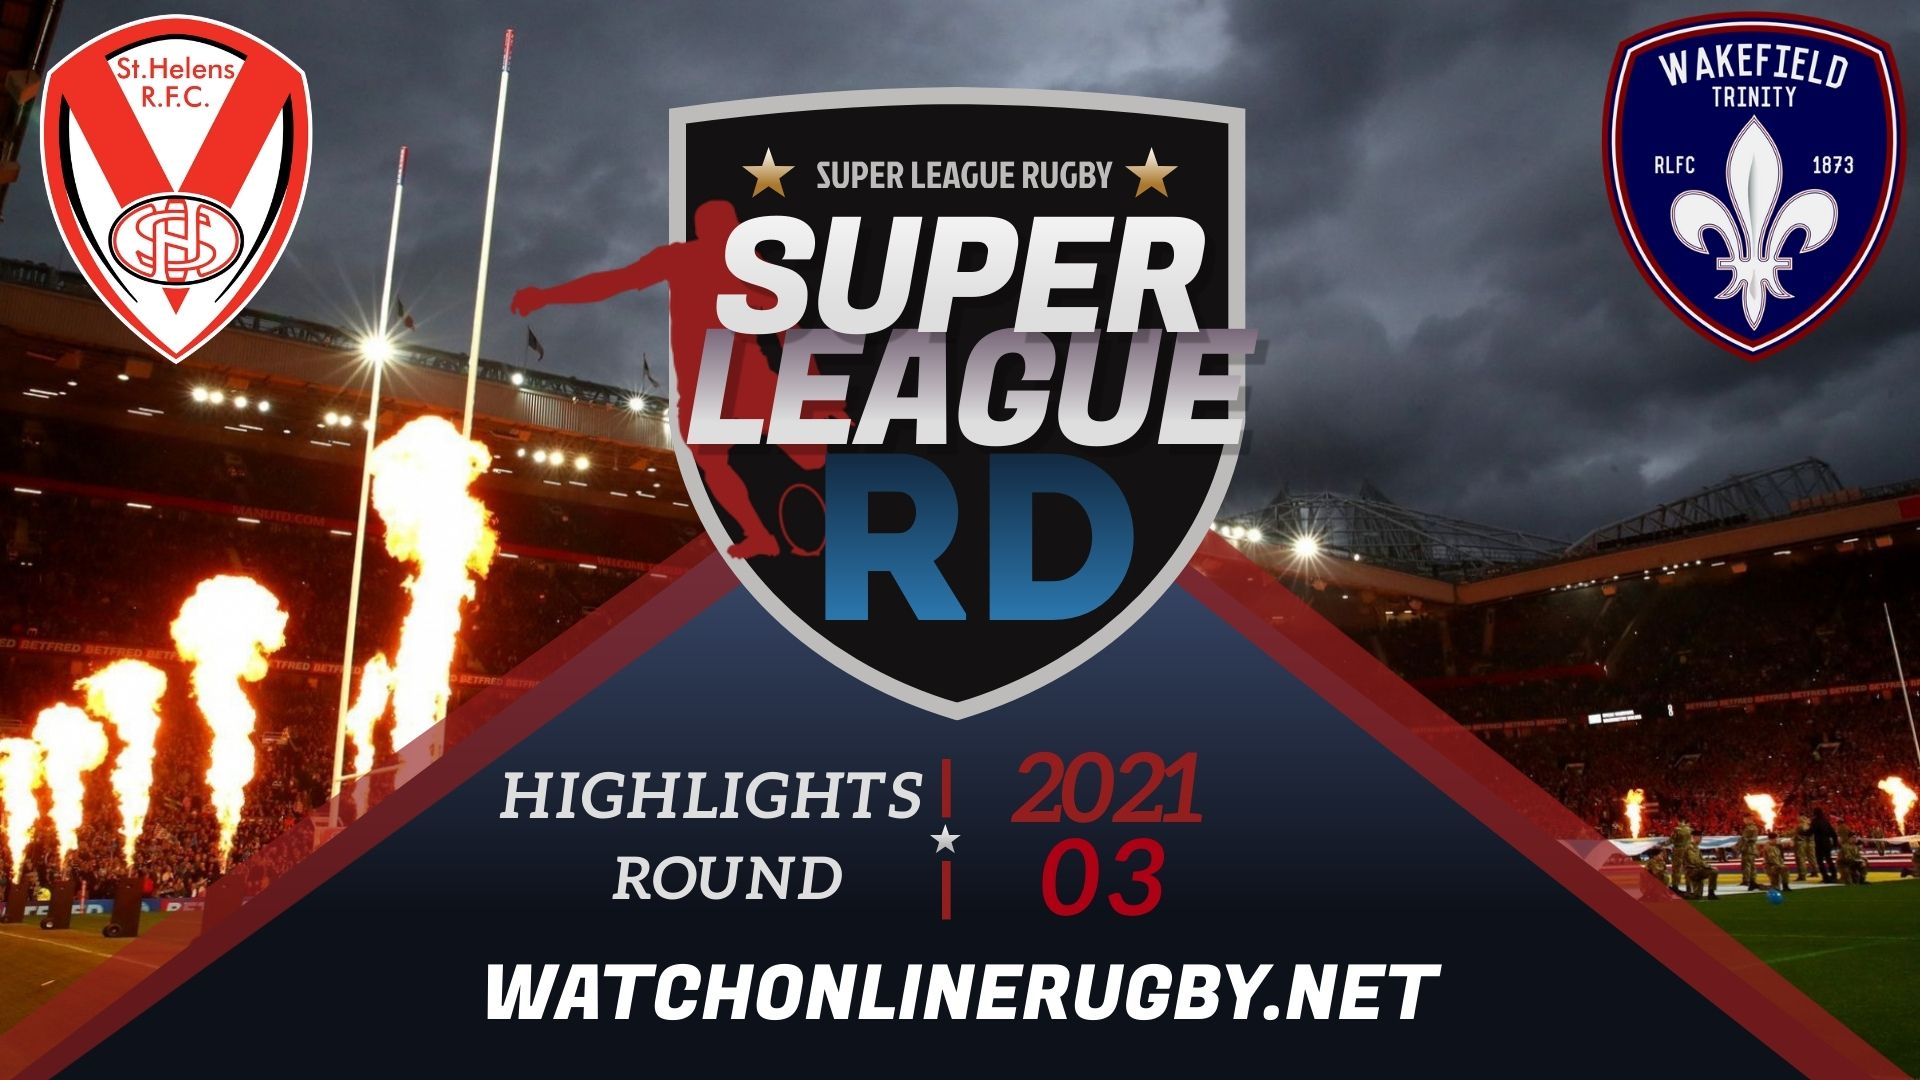 St Helens Vs Wakefield Trinity Super League Rugby 2021 RD 3